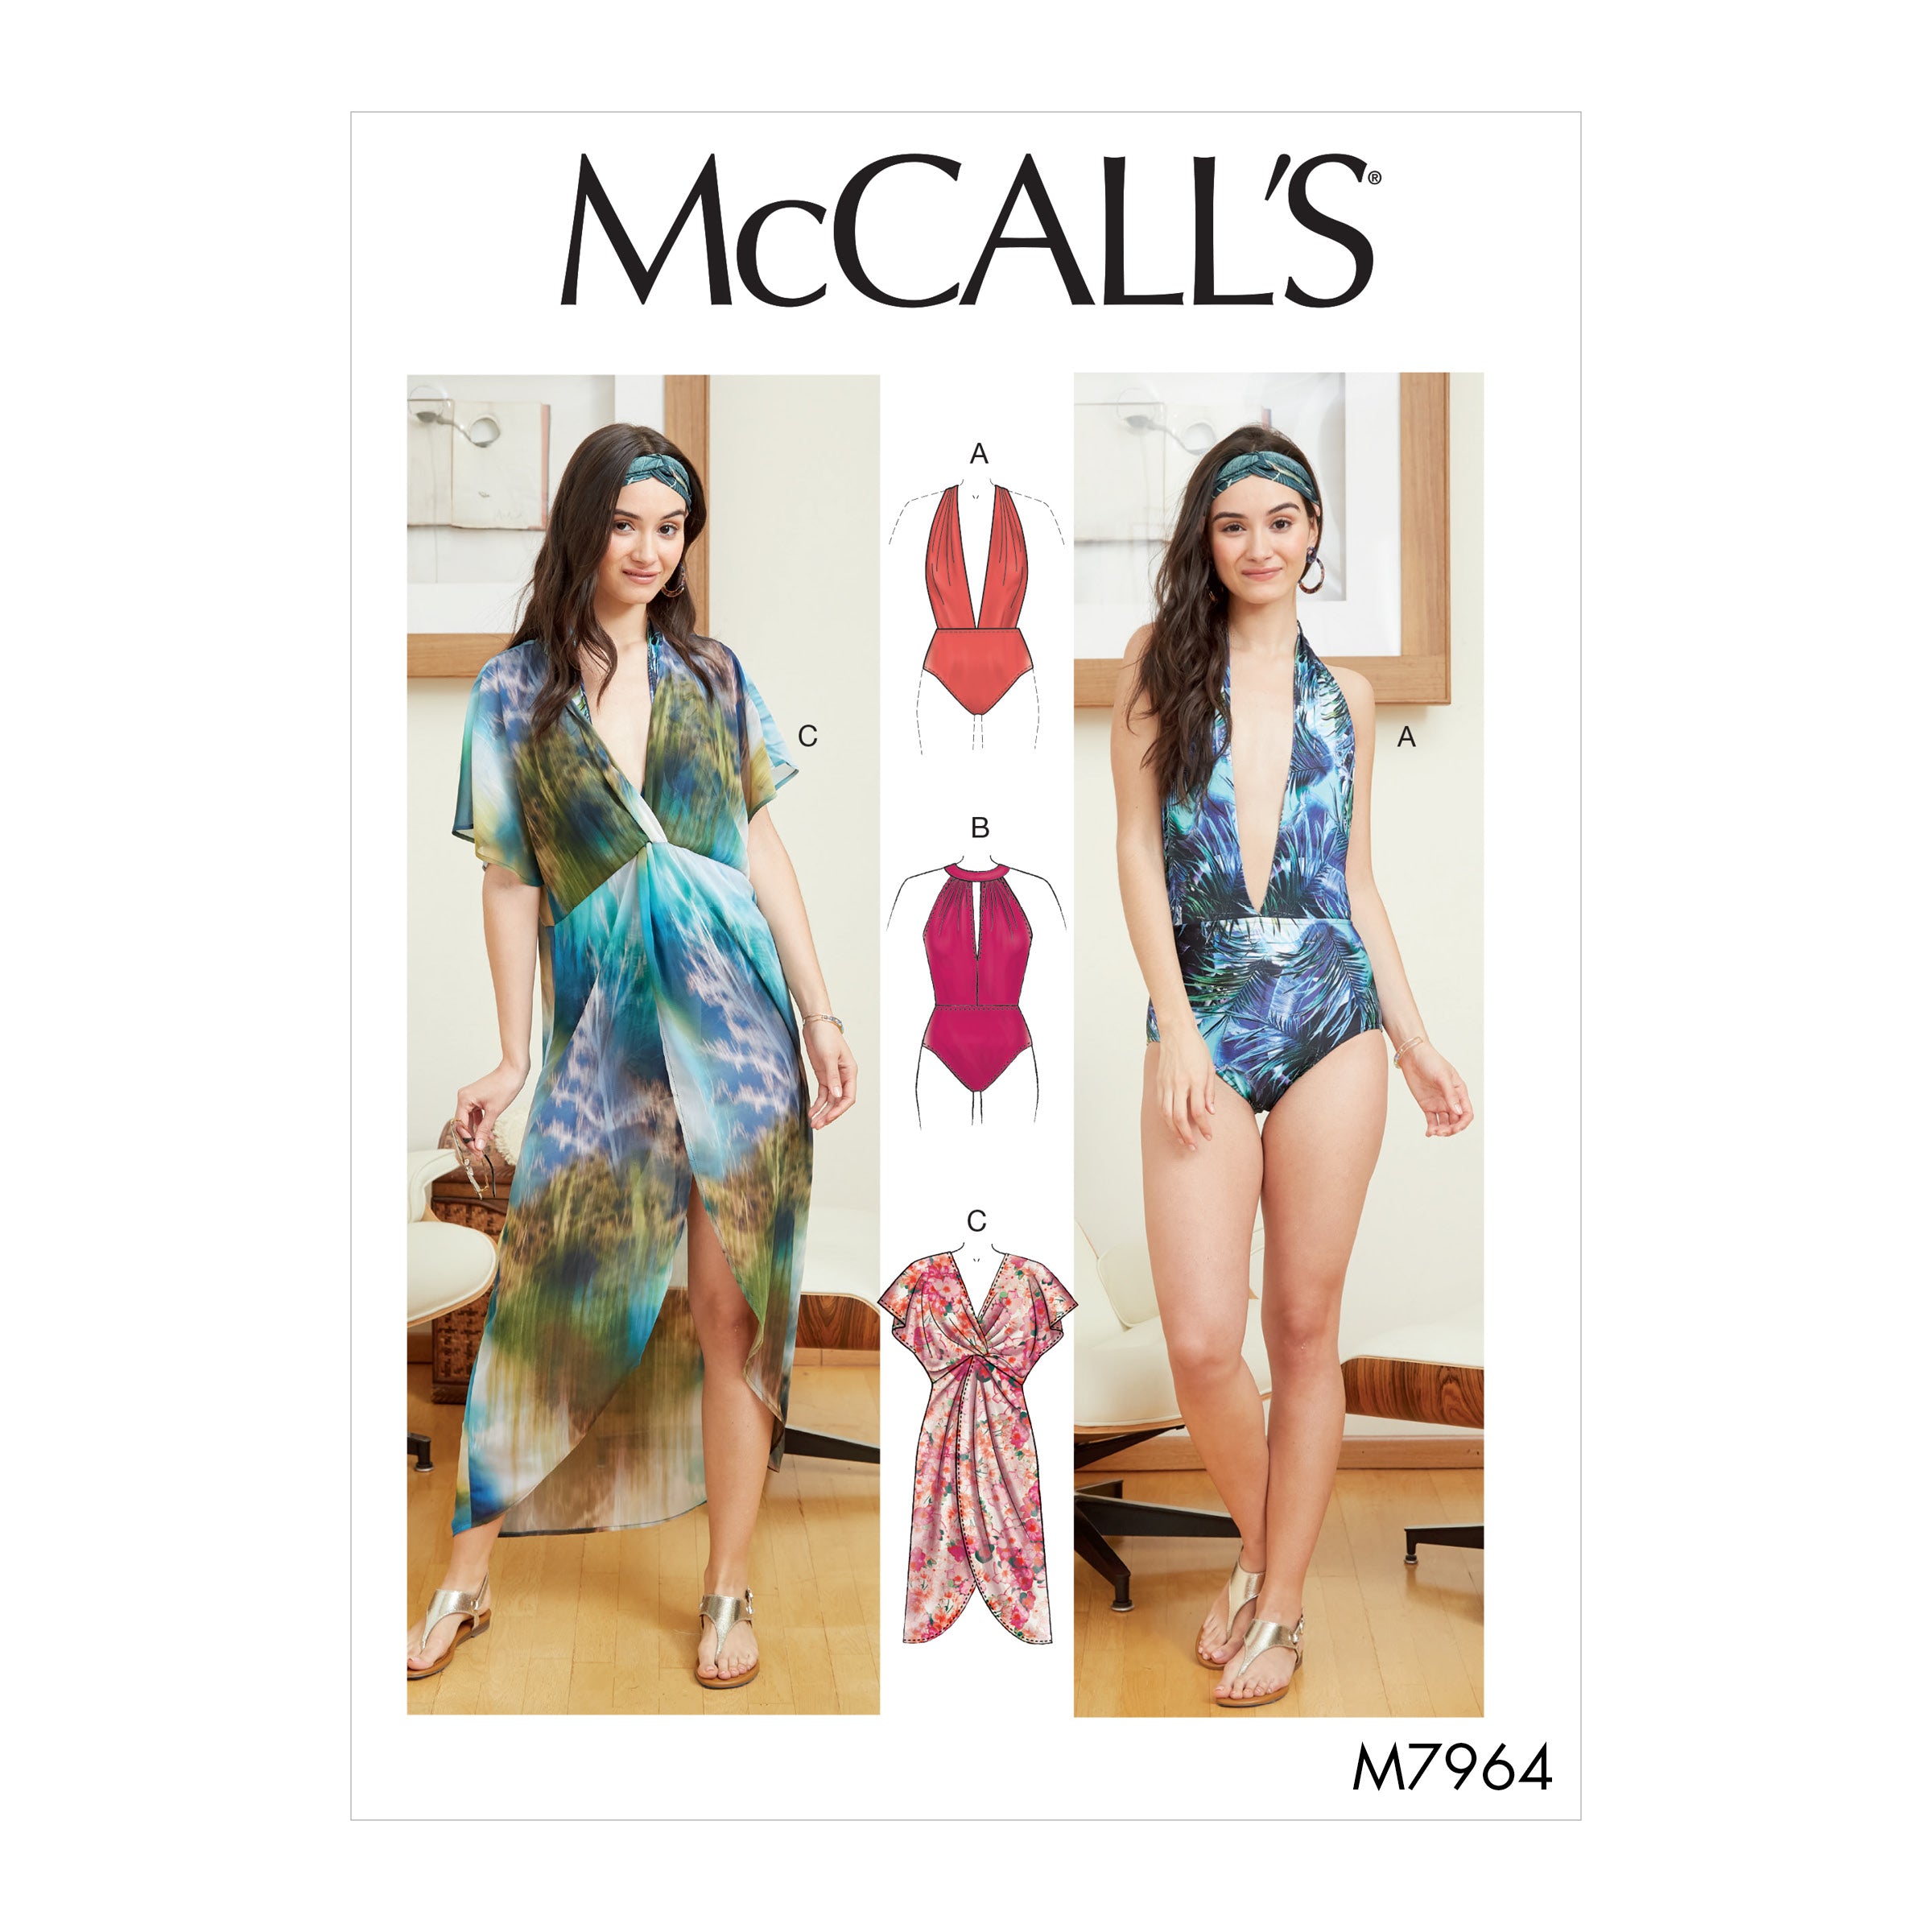 McCalls Swimsuit and Cover-Up M7964